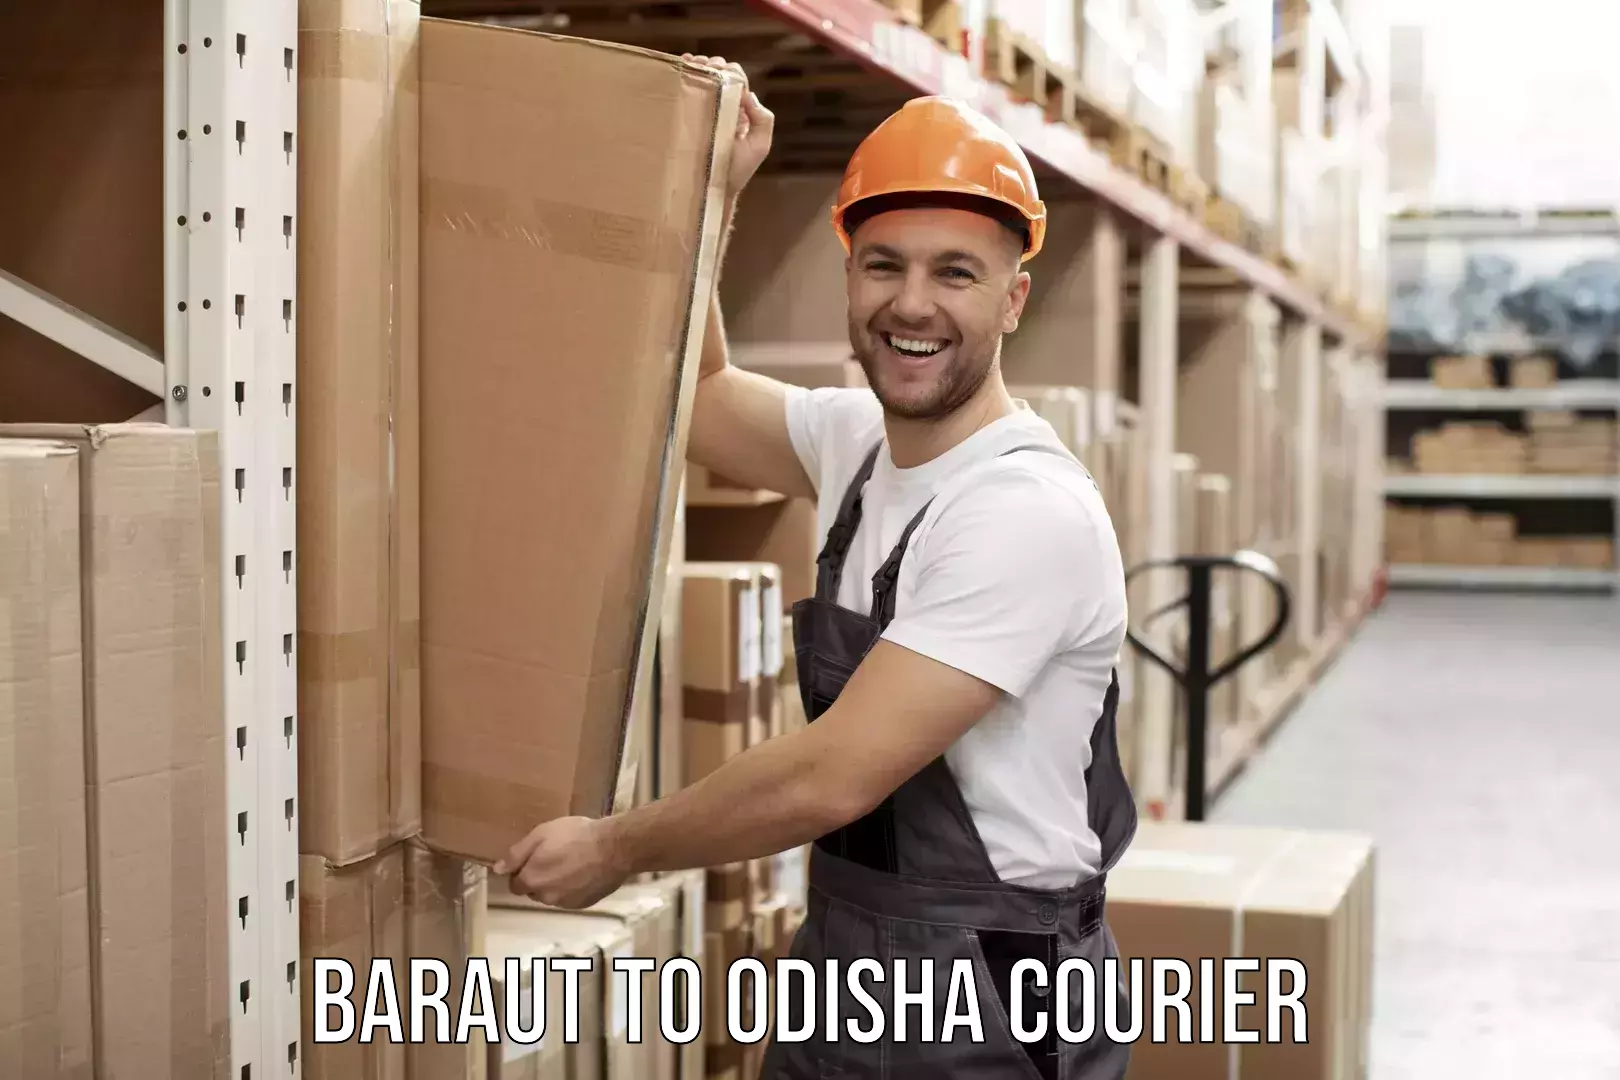 Furniture moving specialists Baraut to Loisingha